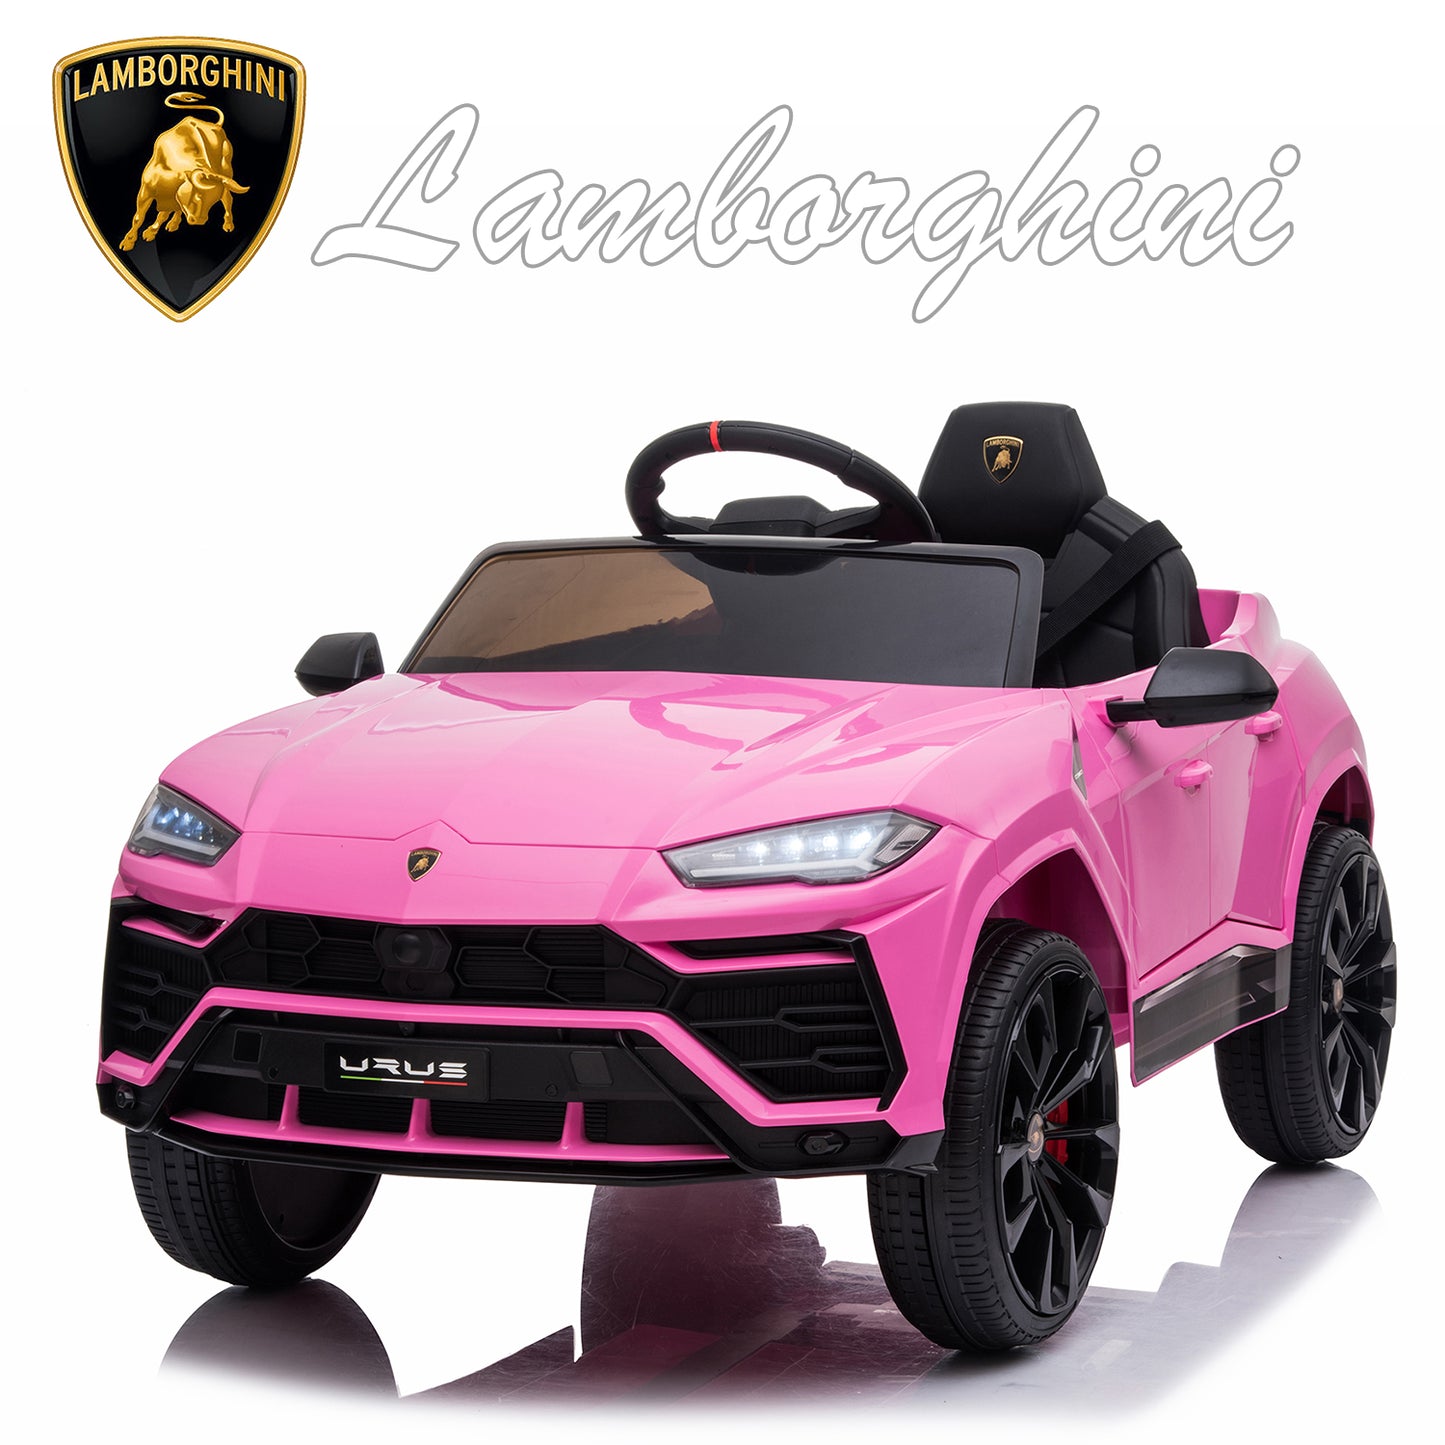 SYNGAR Licensed Lamborghini 12 V Powered Ride on Cars with Remote Control, 3 Speeds, LED Lights, MP3 Player, Horn, Kids Electric Vehicles Ride on Toy for Boys Girls, Pink